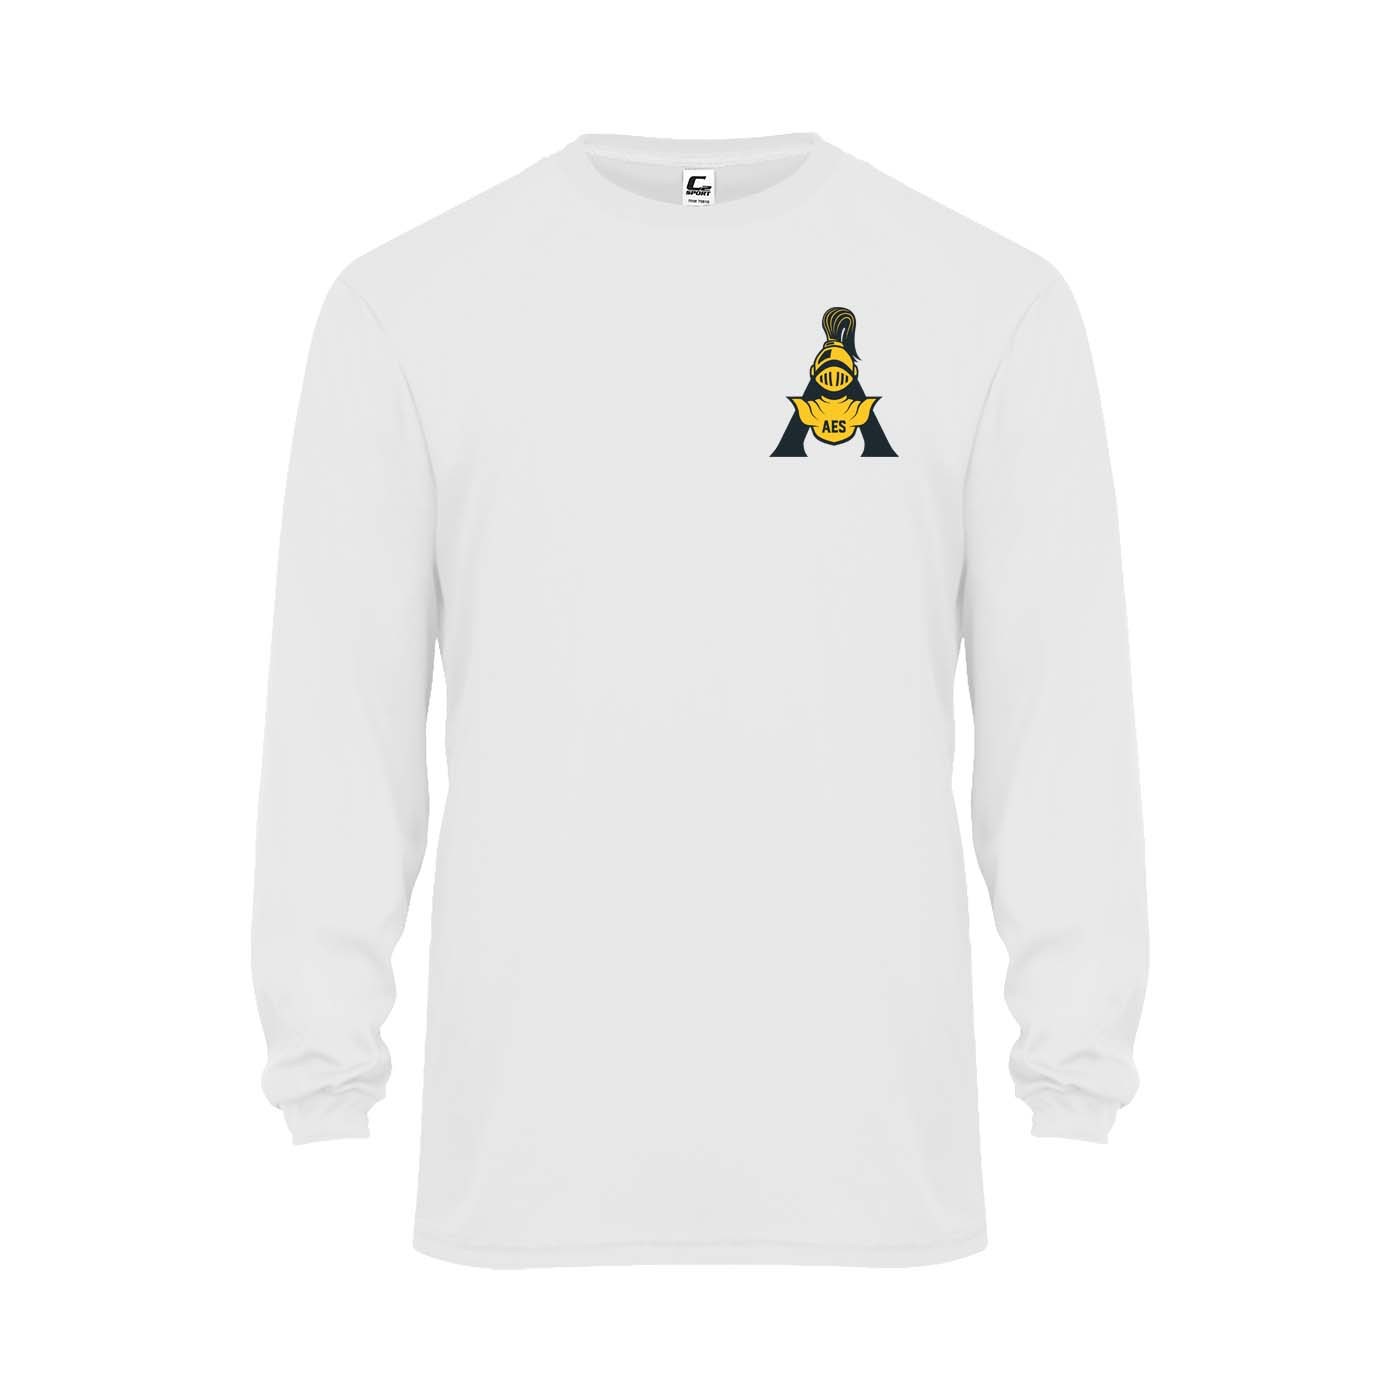 ANN Spirit L/S Performance T-Shirt w/ AES Logo #25-26 - Please Allow 3-4 Weeks for Delivery